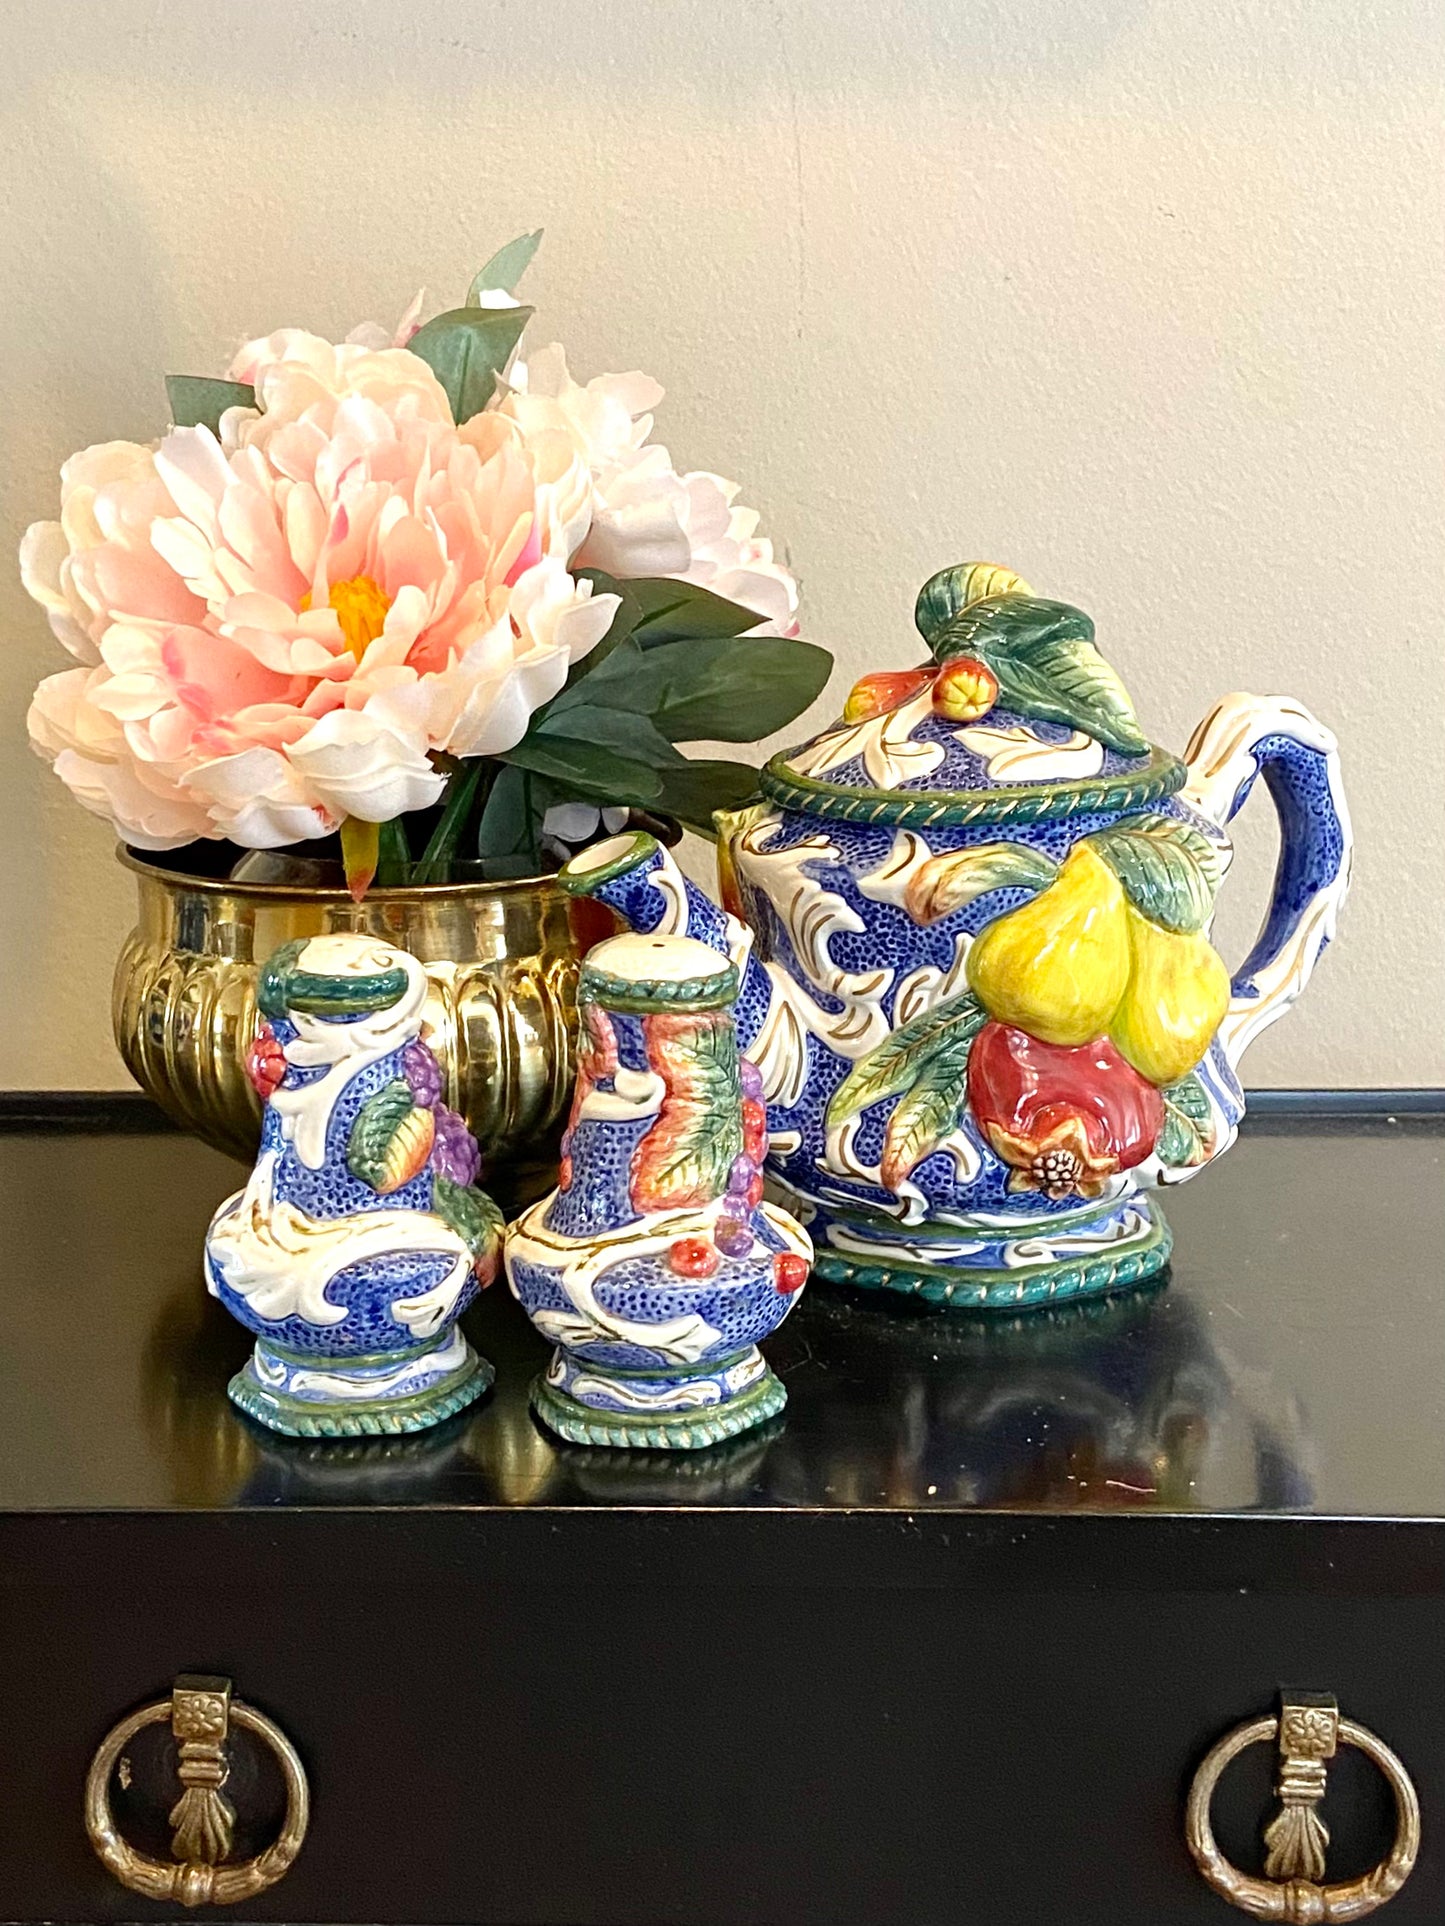 Vintage fitz & Floyd majolica style matching tea pot and salt and pepper shakers